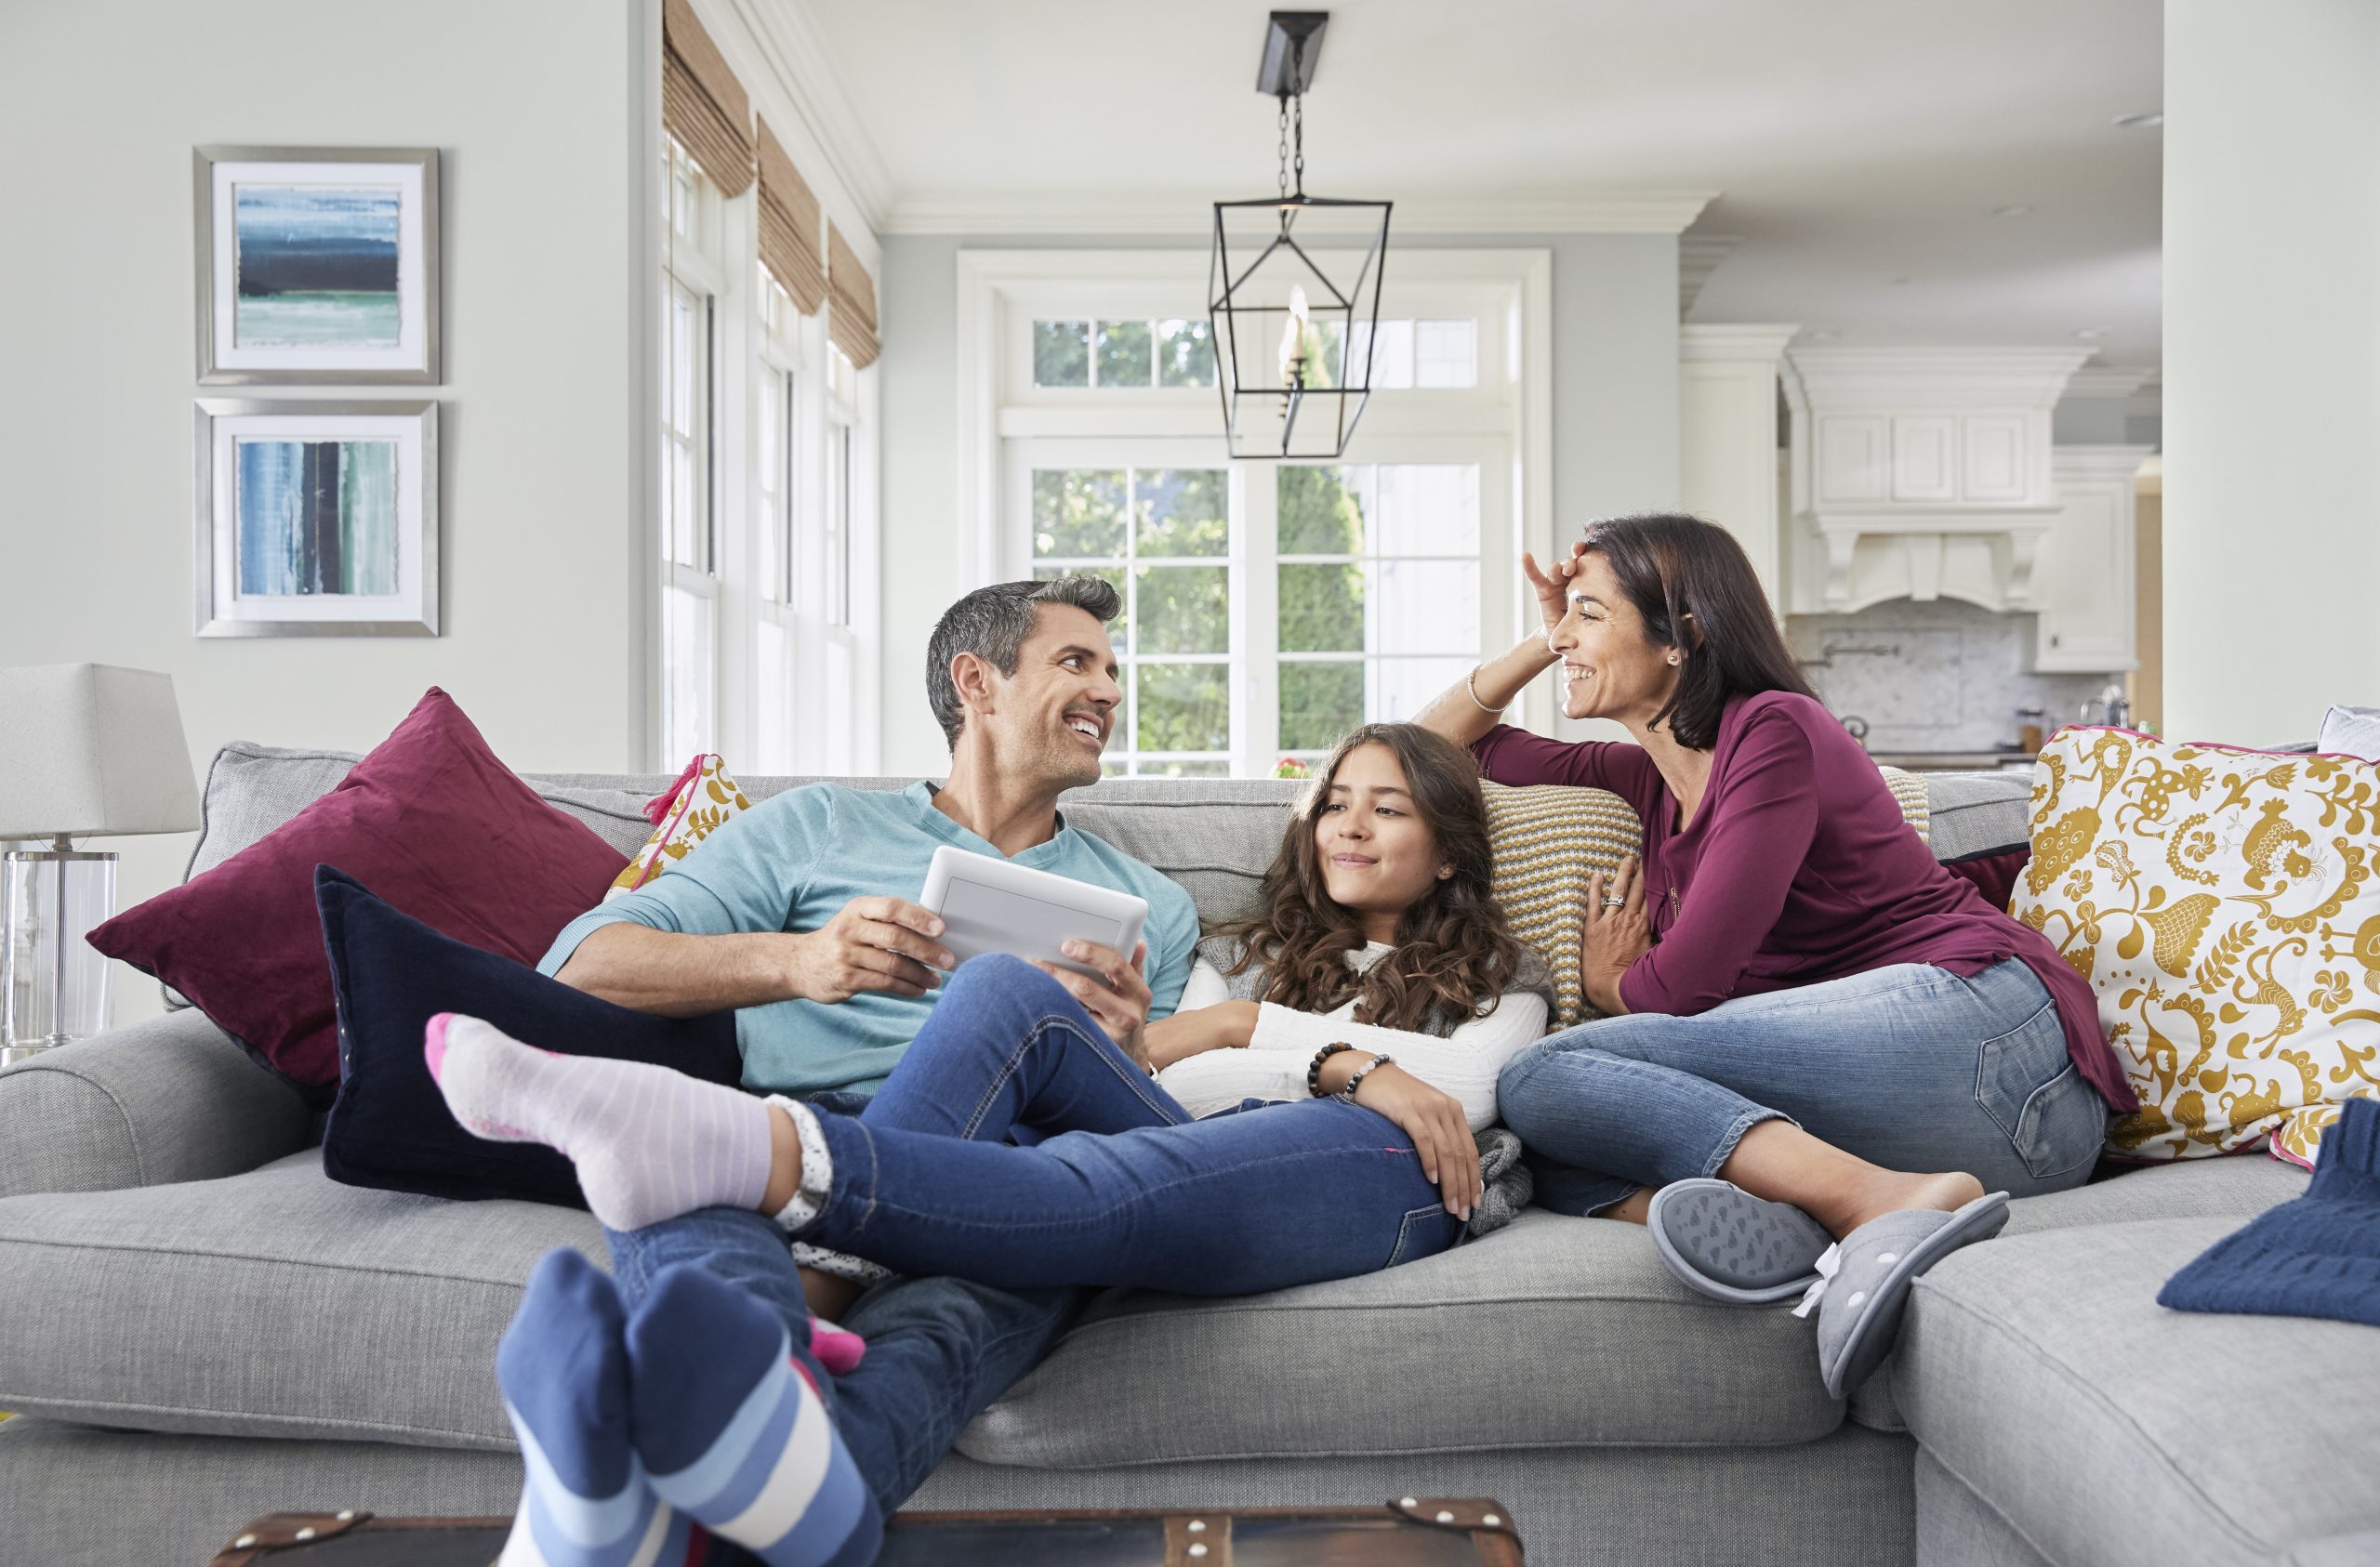 A happy family sits on their living room couch enjoying peace of mind with their security system and home automation